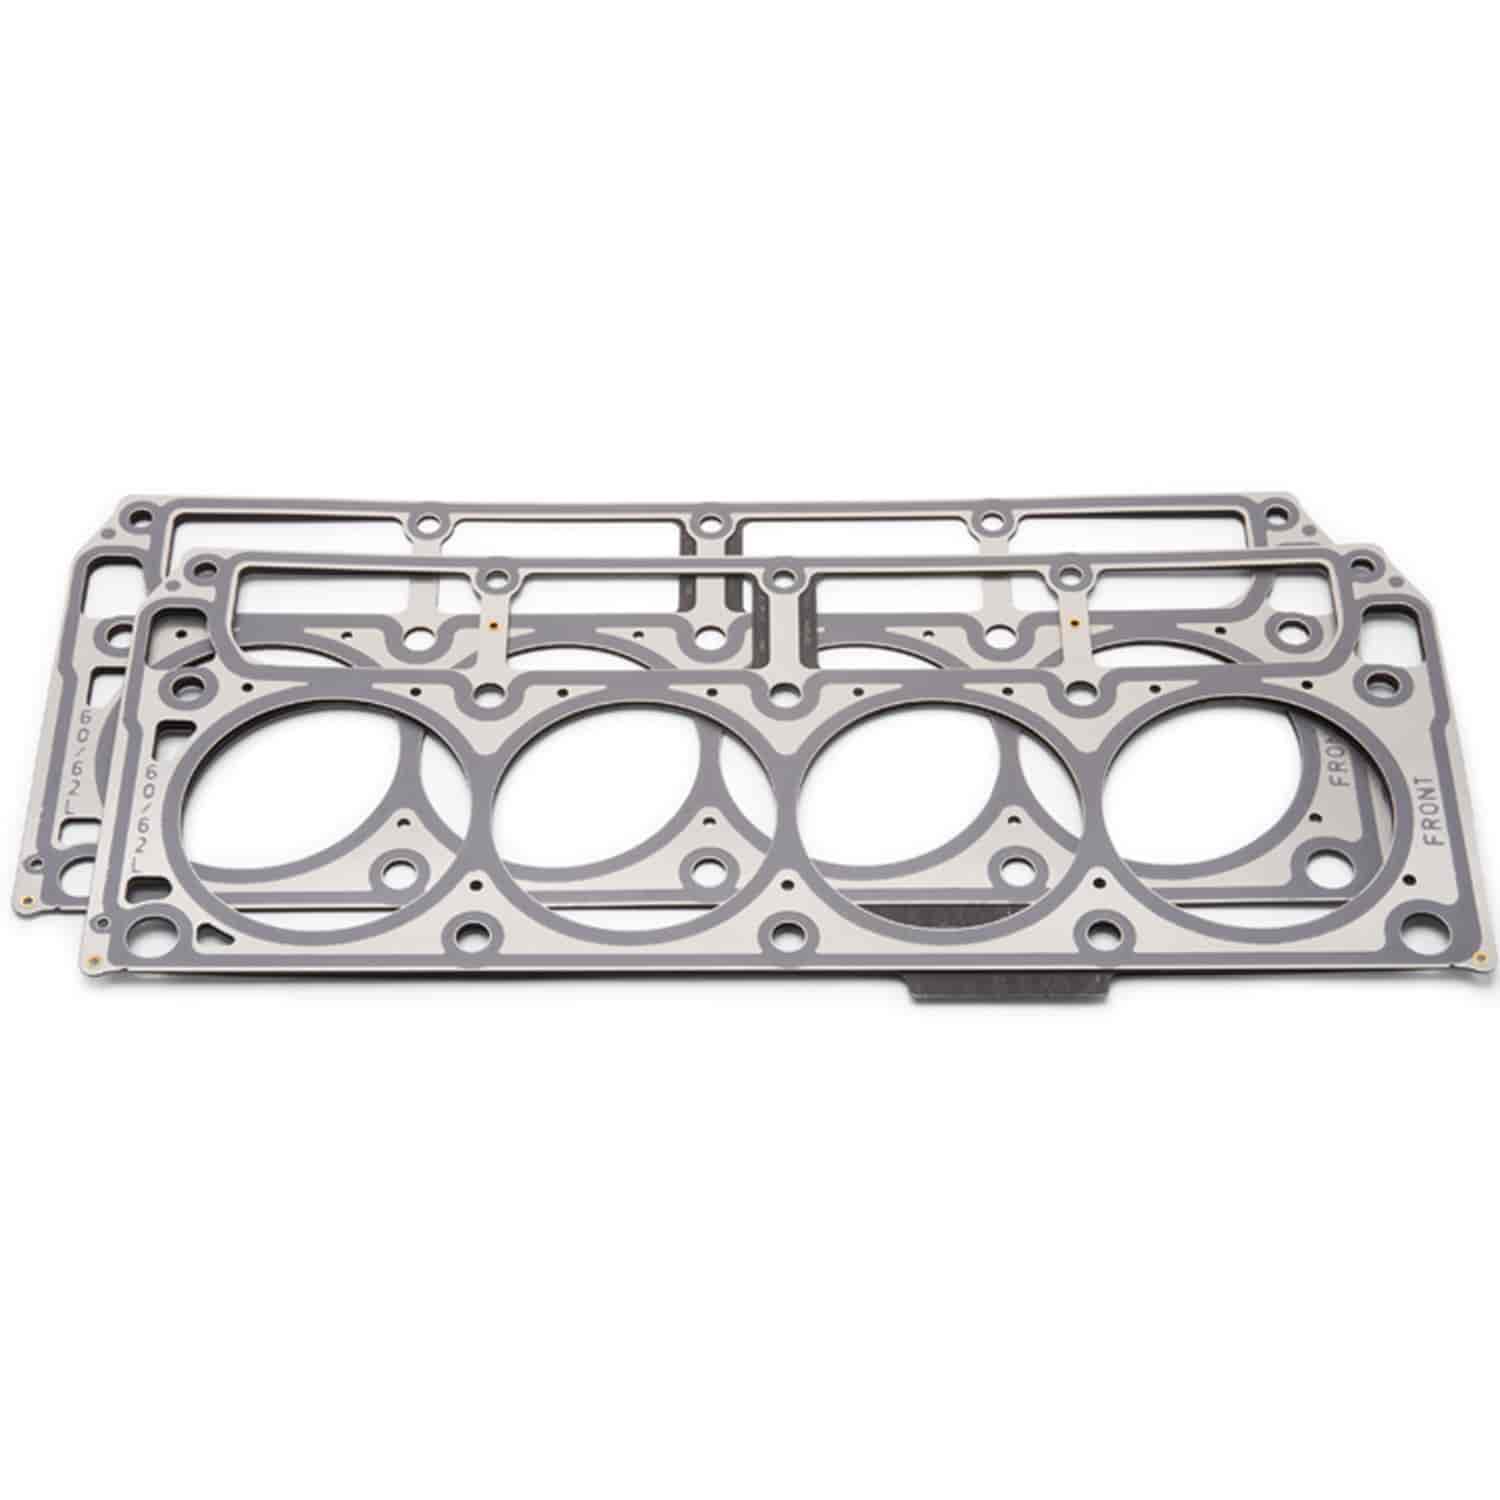 Head Gaskets for 2005-Later LS2/LS3 6.0L/6.2L